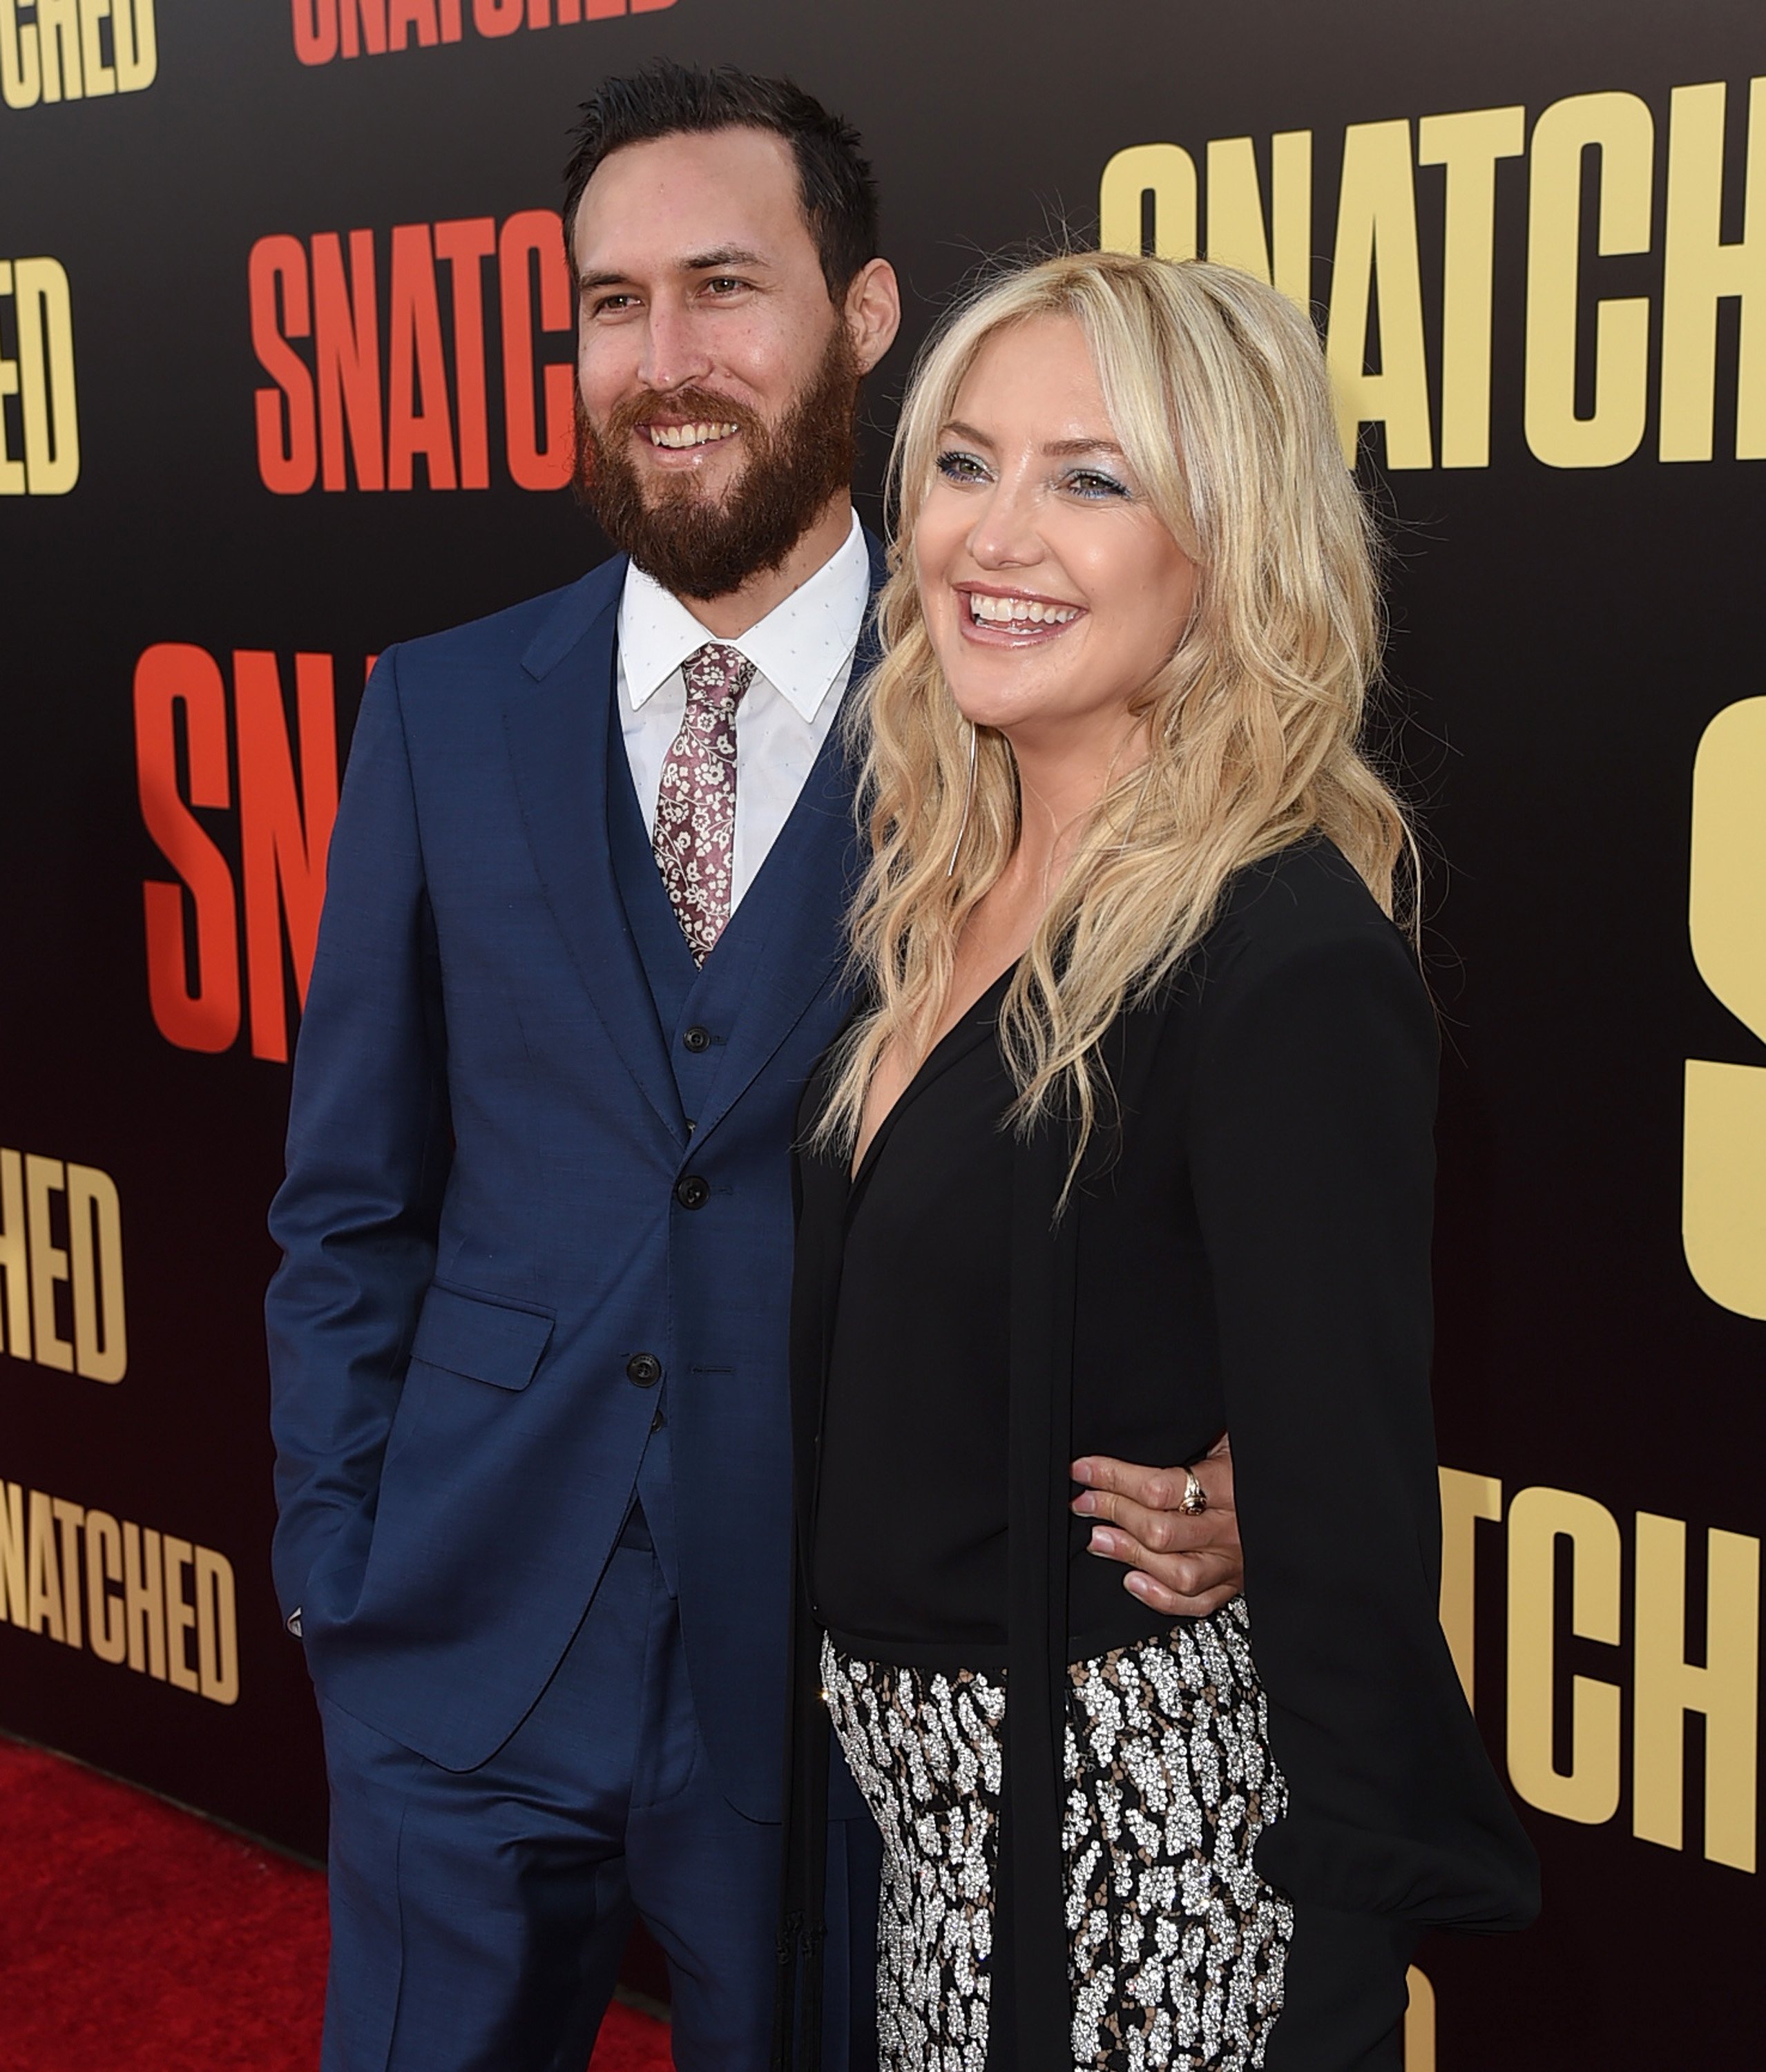 Kate Hudson and boyfriend, Danny Fukikawa, at the "Snatched" movie premiere in Hollywood, May 10, 2017. | Photo: Getty Images. 